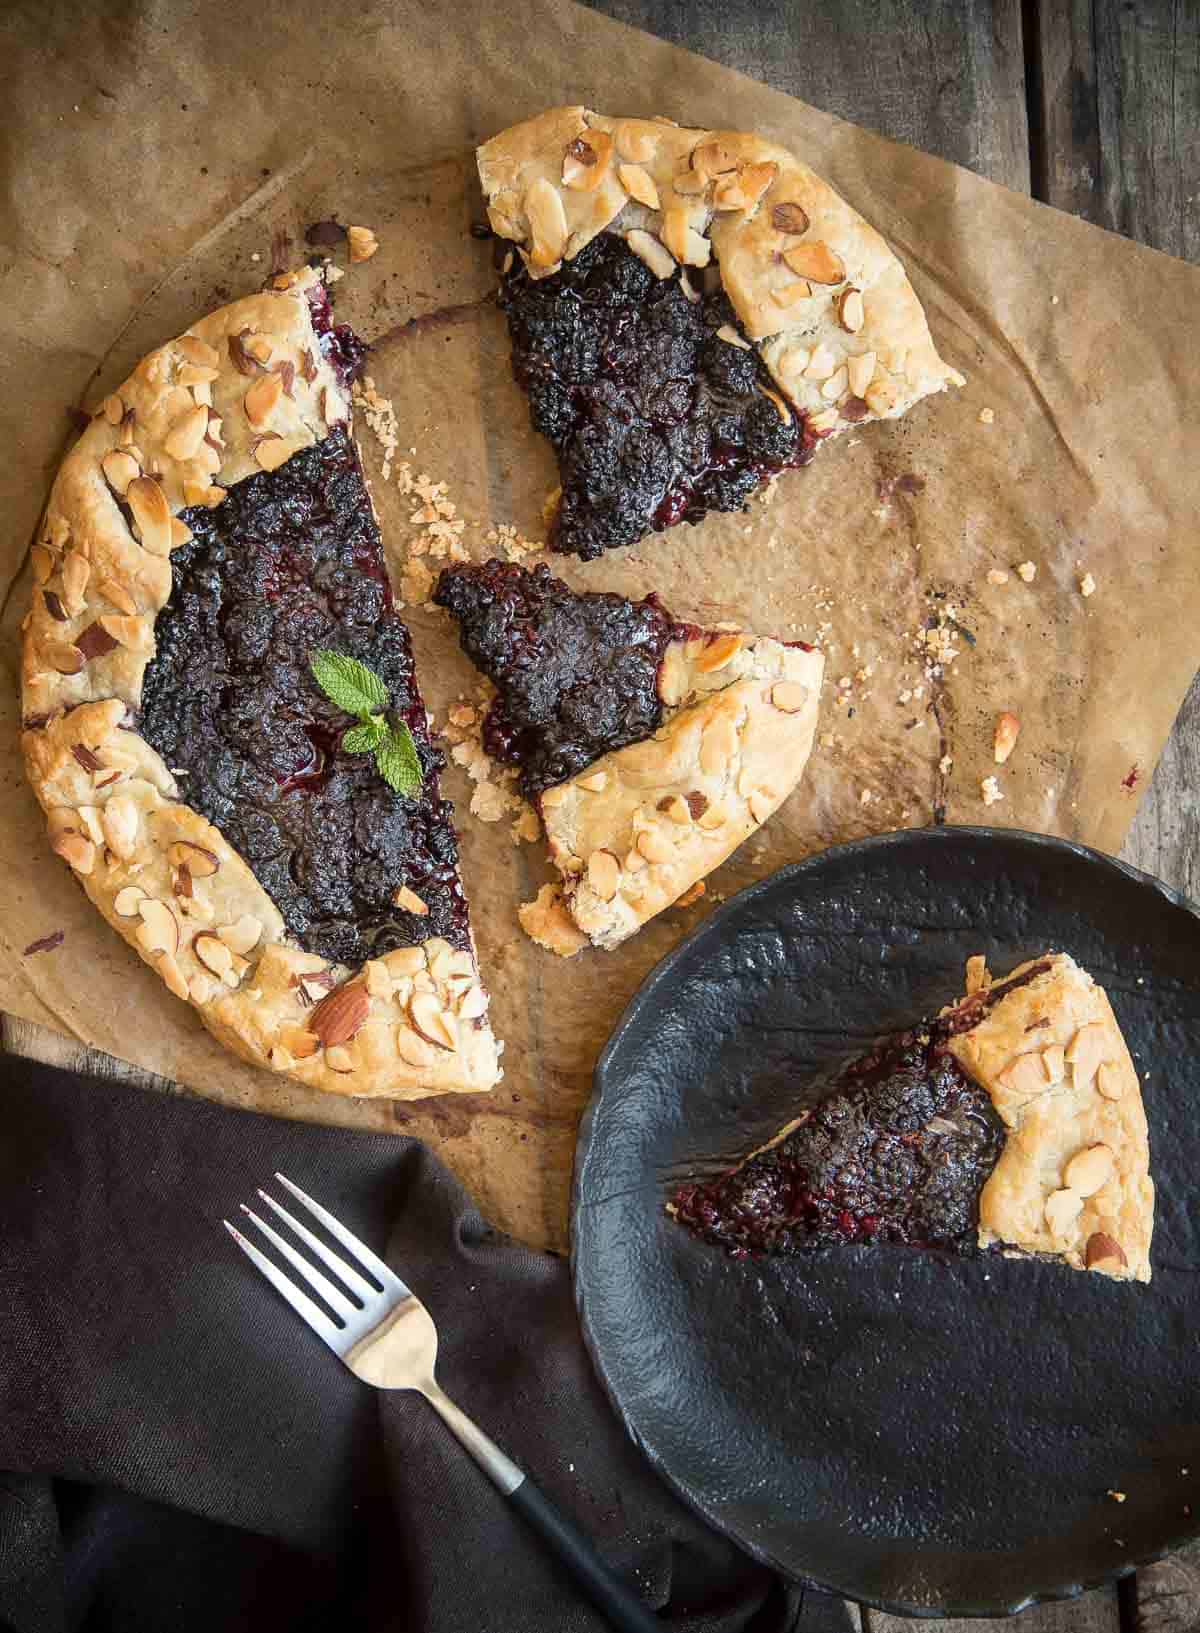 A Grilled Blackberry Crostata on a sheet of butcher paper with a slice of blackberry crostata on a plate